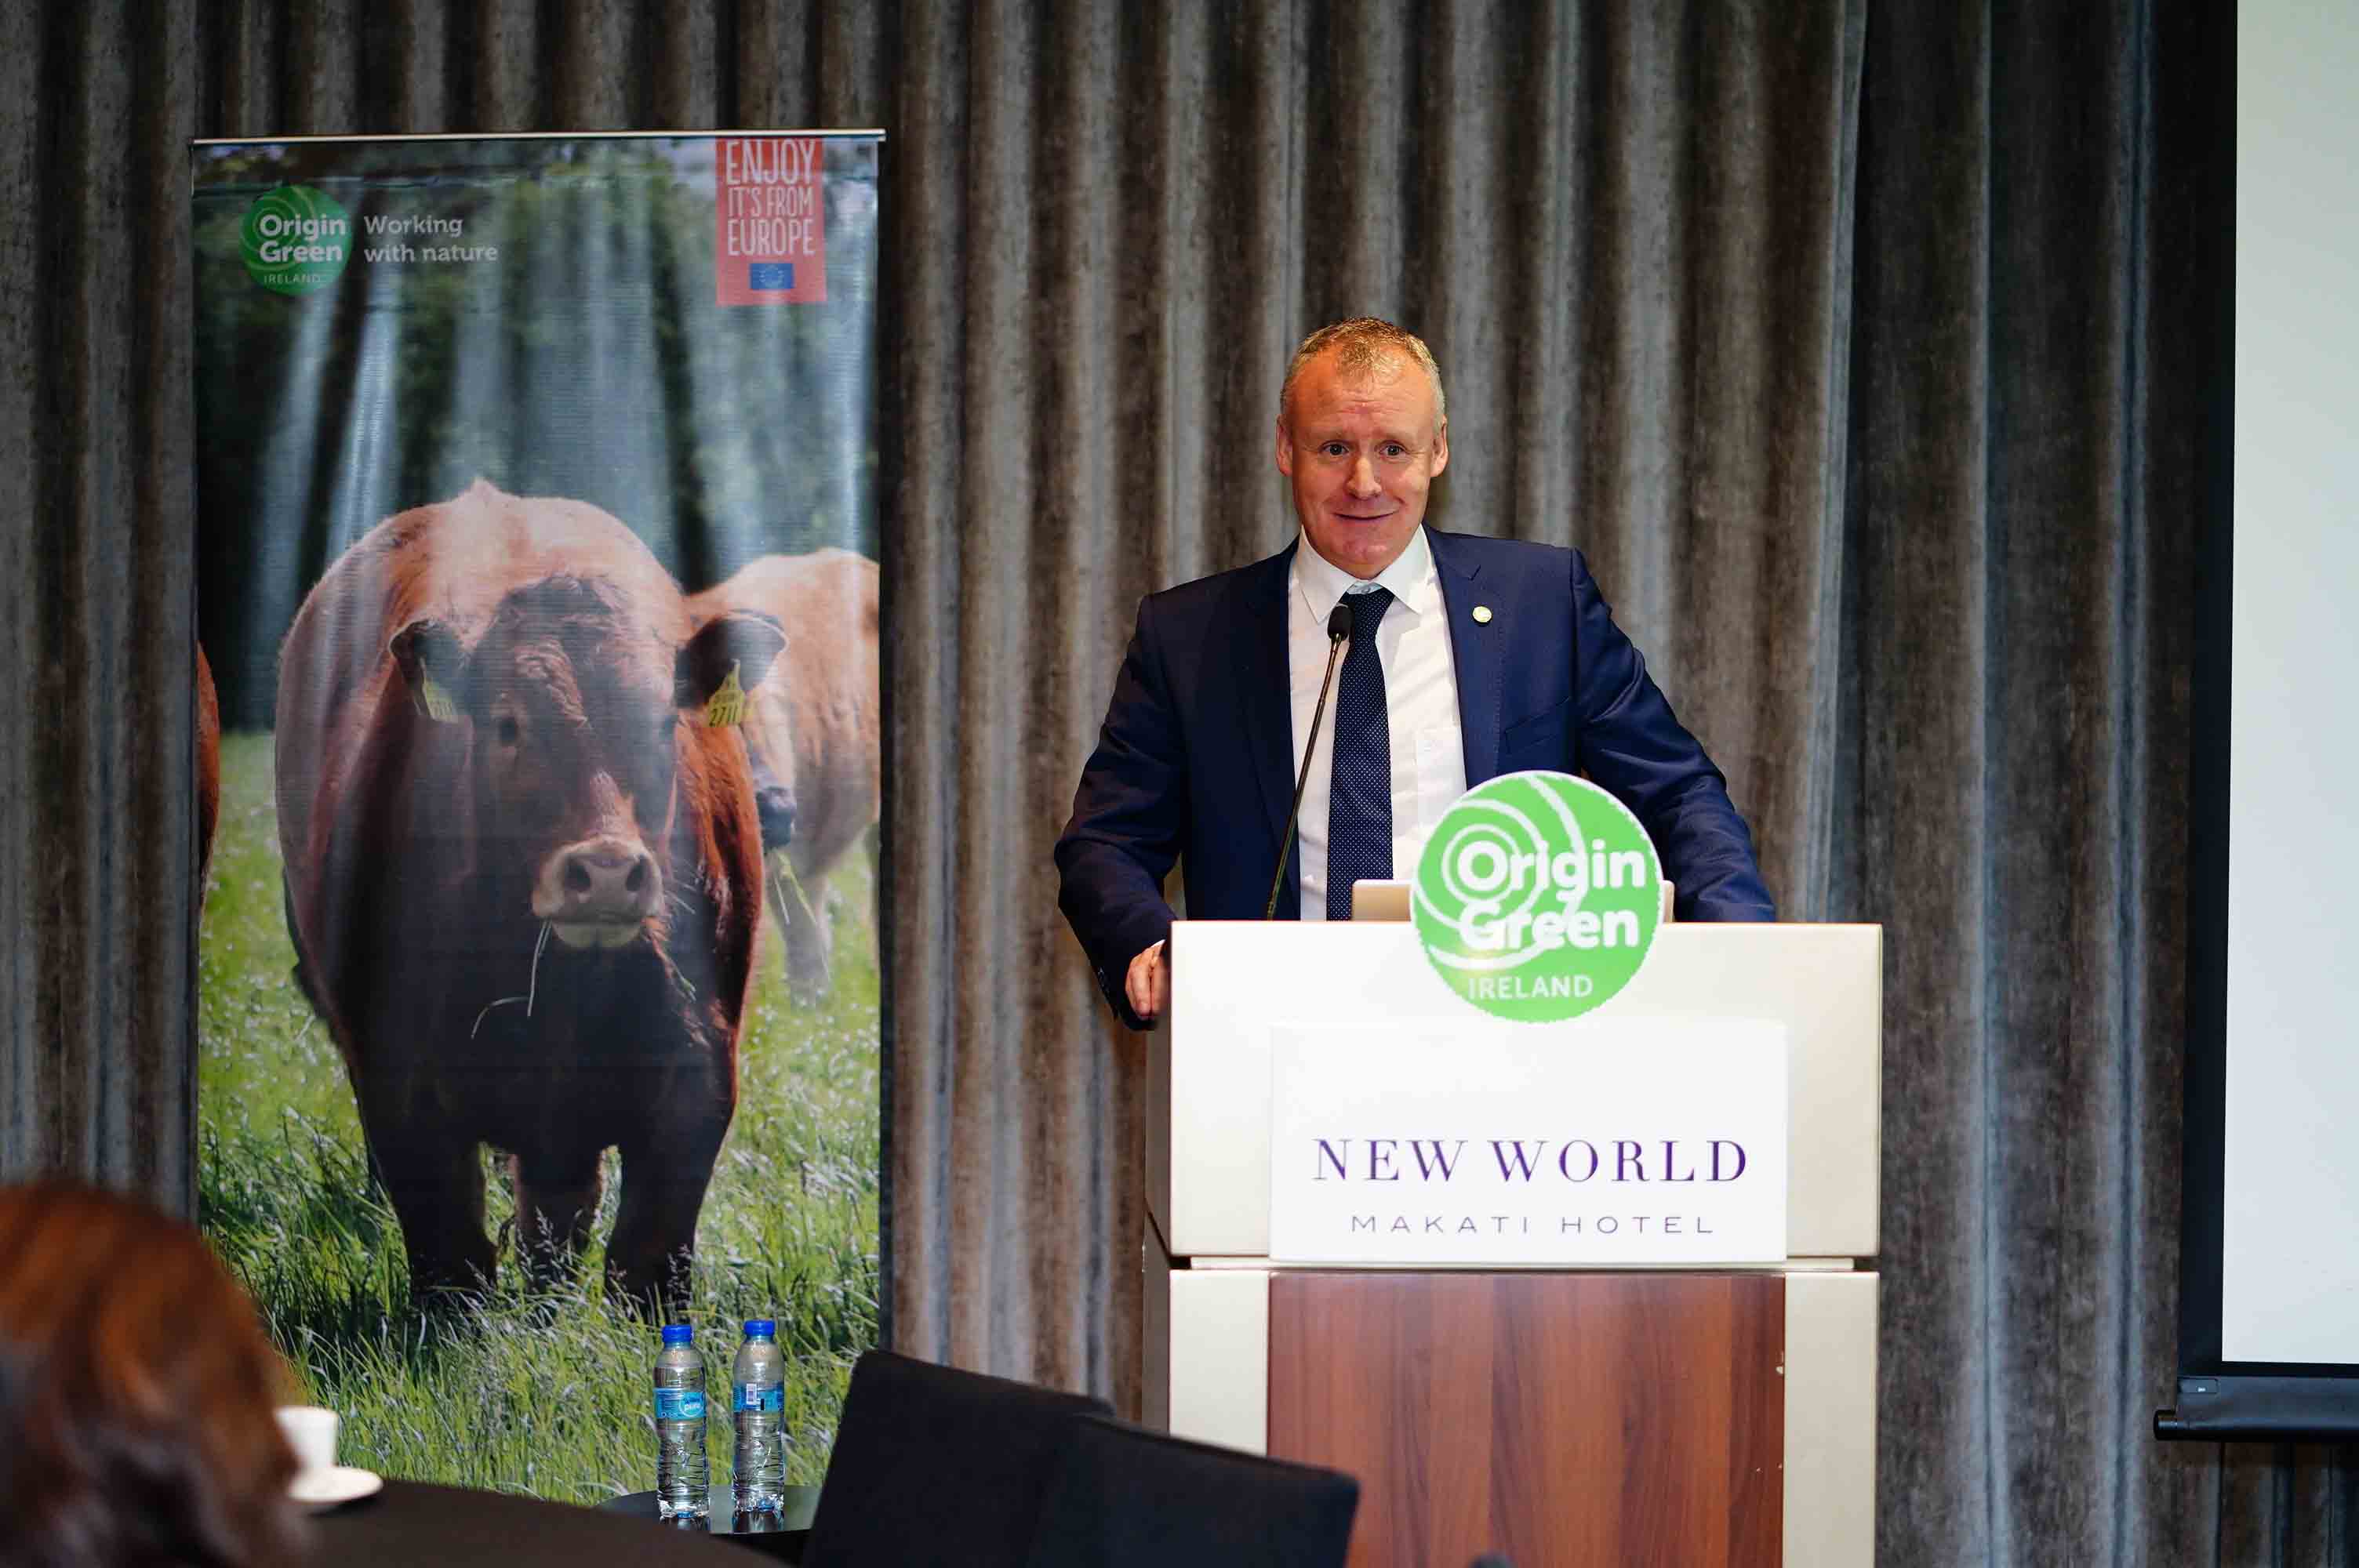 Bord Bia plans to take farmers, and even consumers, to Ireland to learn about their standard procedures on maintaining and producing their high quality pork and beef